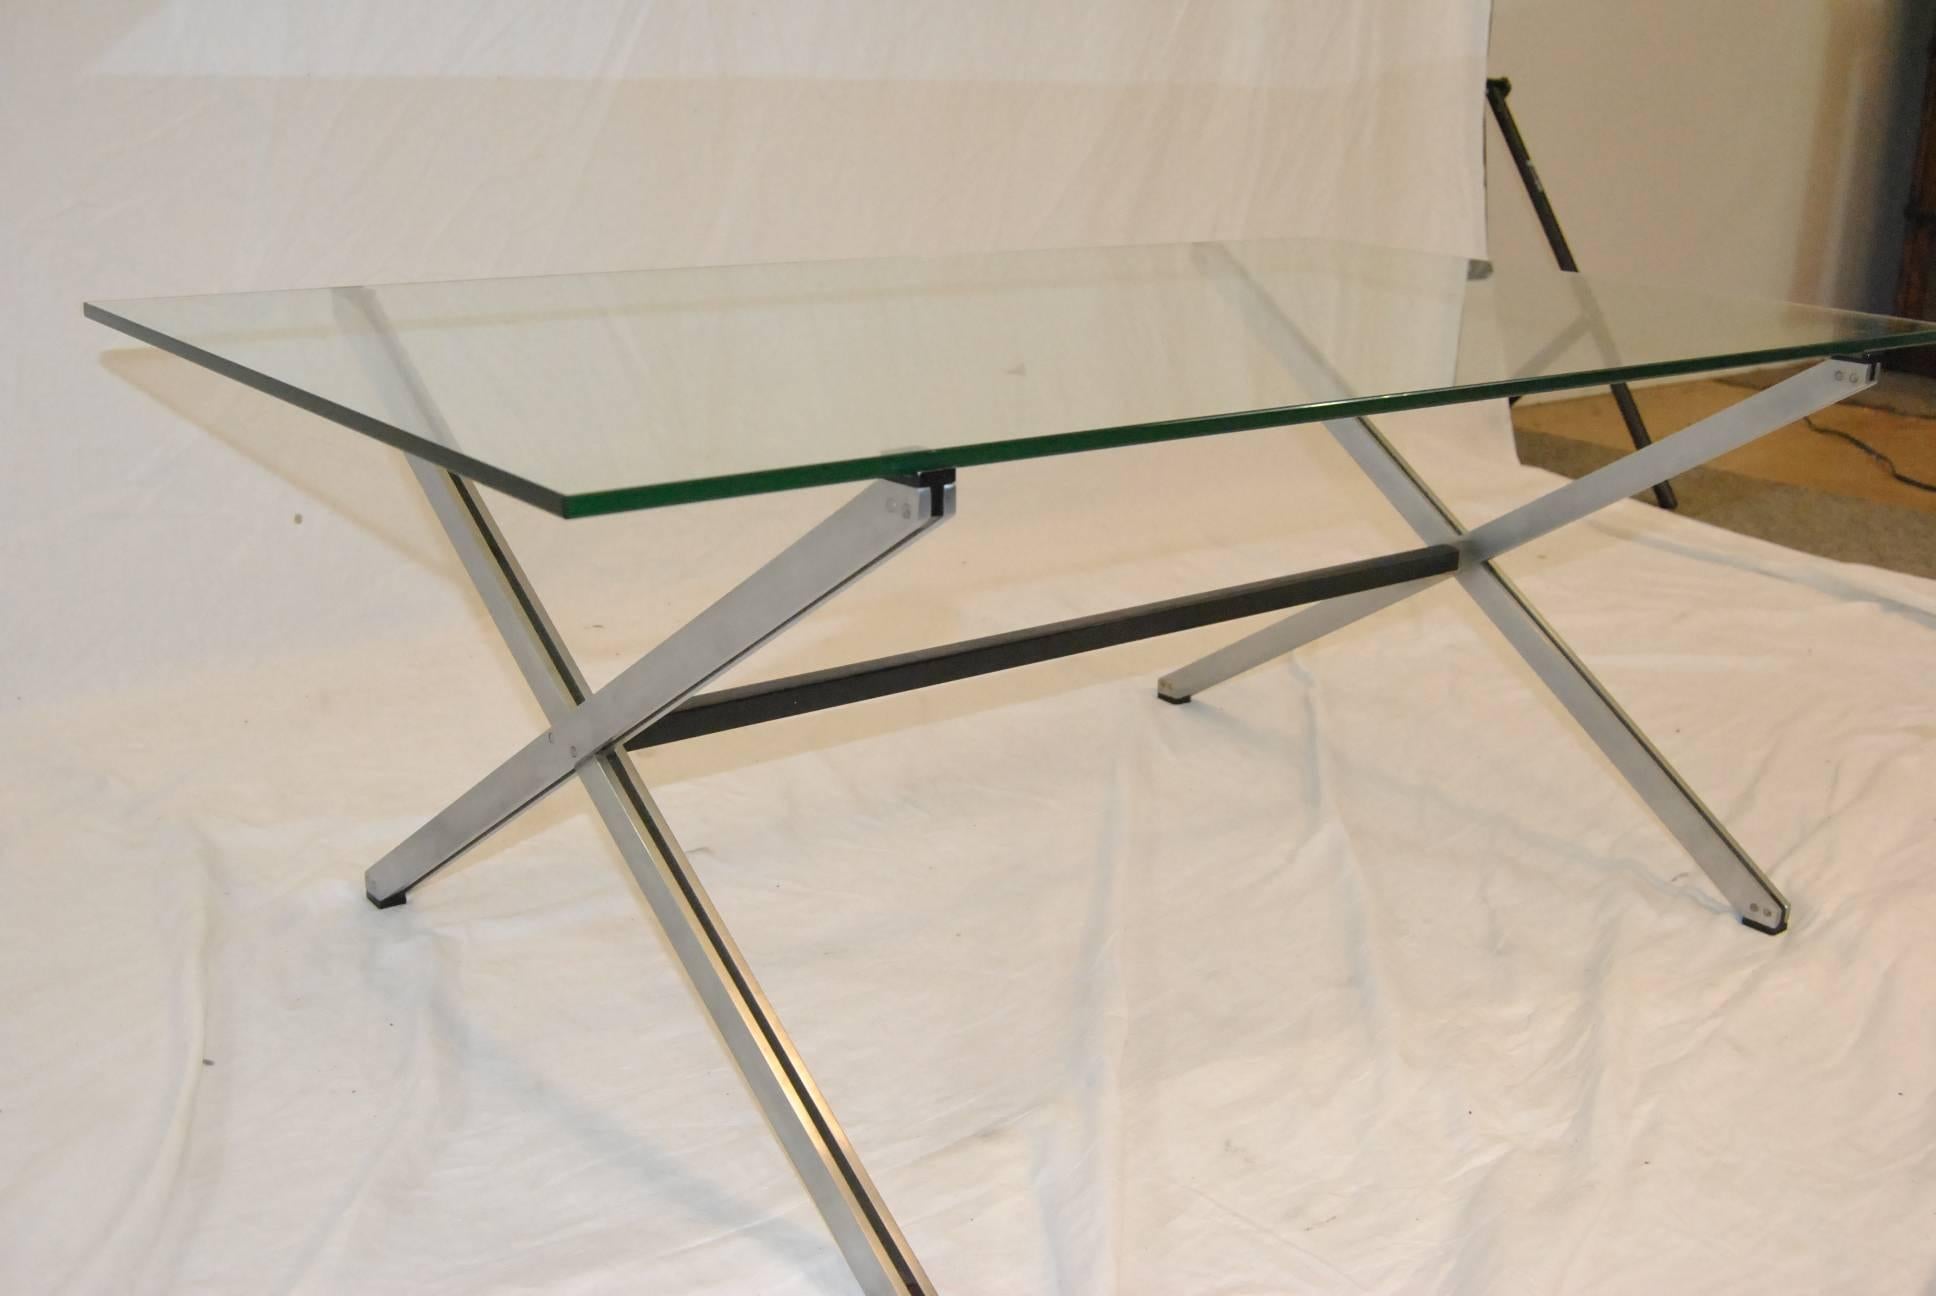 Another Classic Mid-Century design with architectural overtones by Florence Knoll. This cocktail table is part of the Parallel collection. Table features a chrome plated frame with black enamel supports in a crossed design. Frame supports a thick